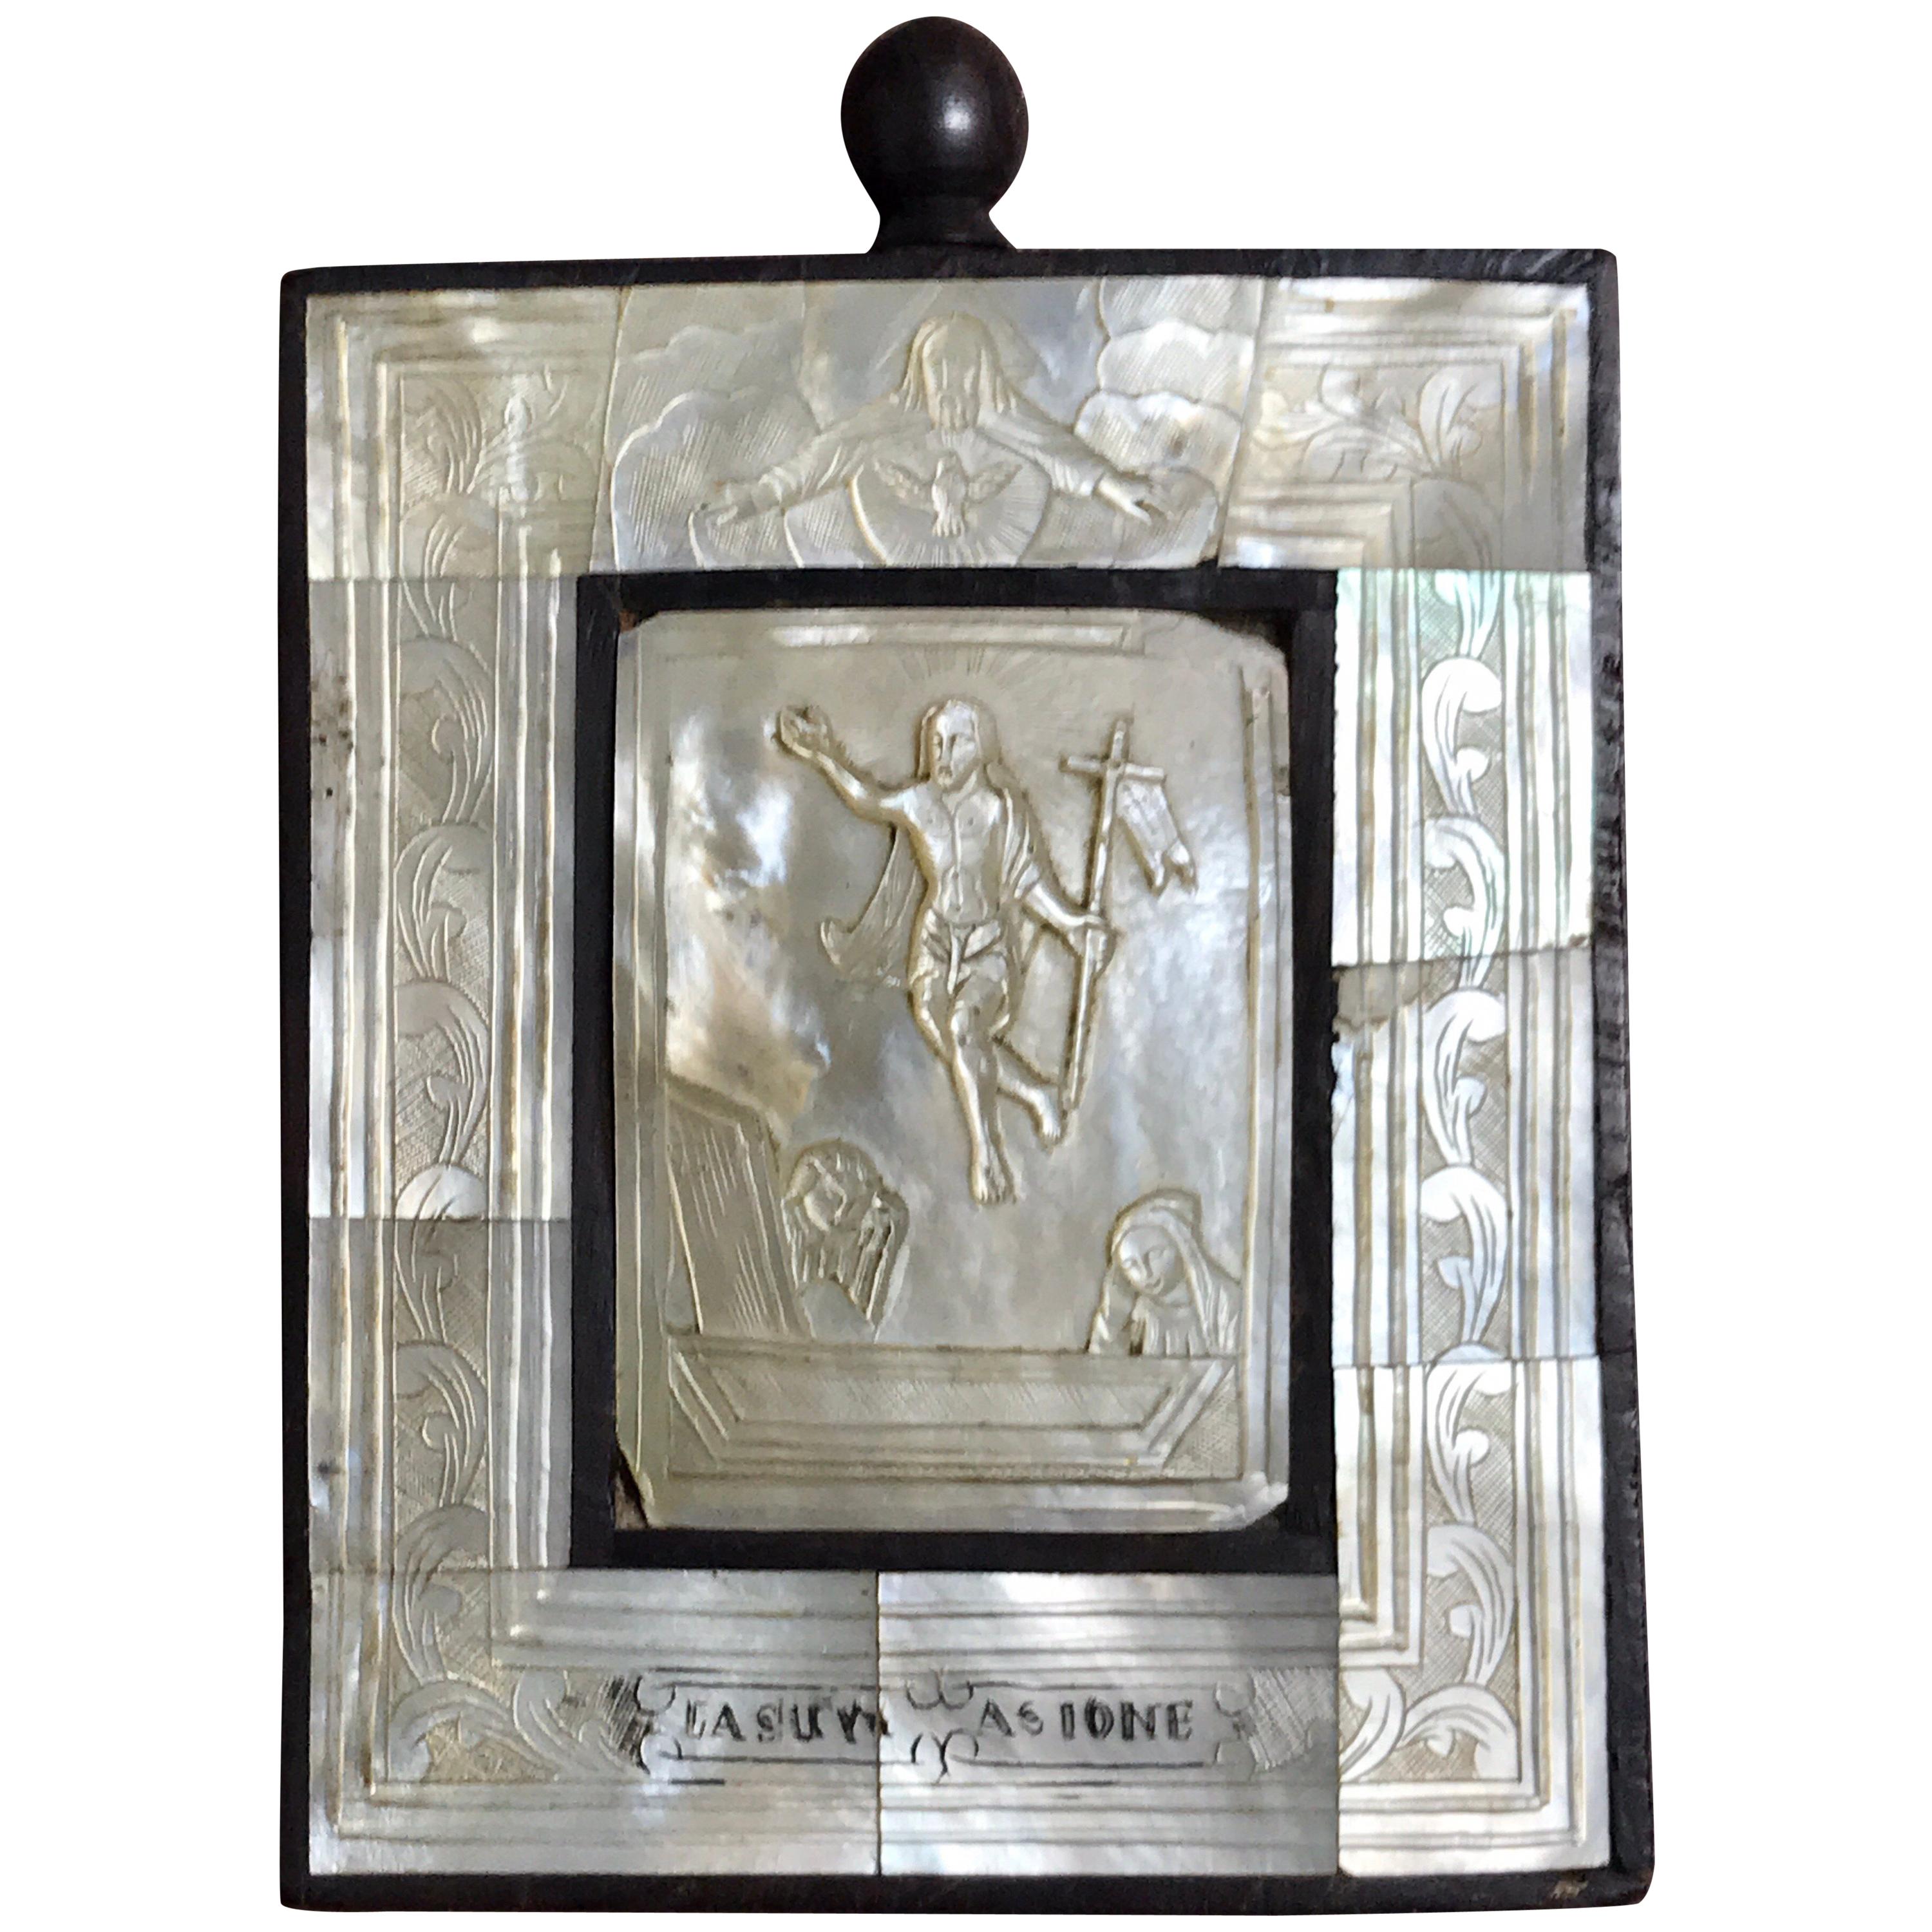 Antique Mother of Pearl Icon "Lasur Asione" For Sale